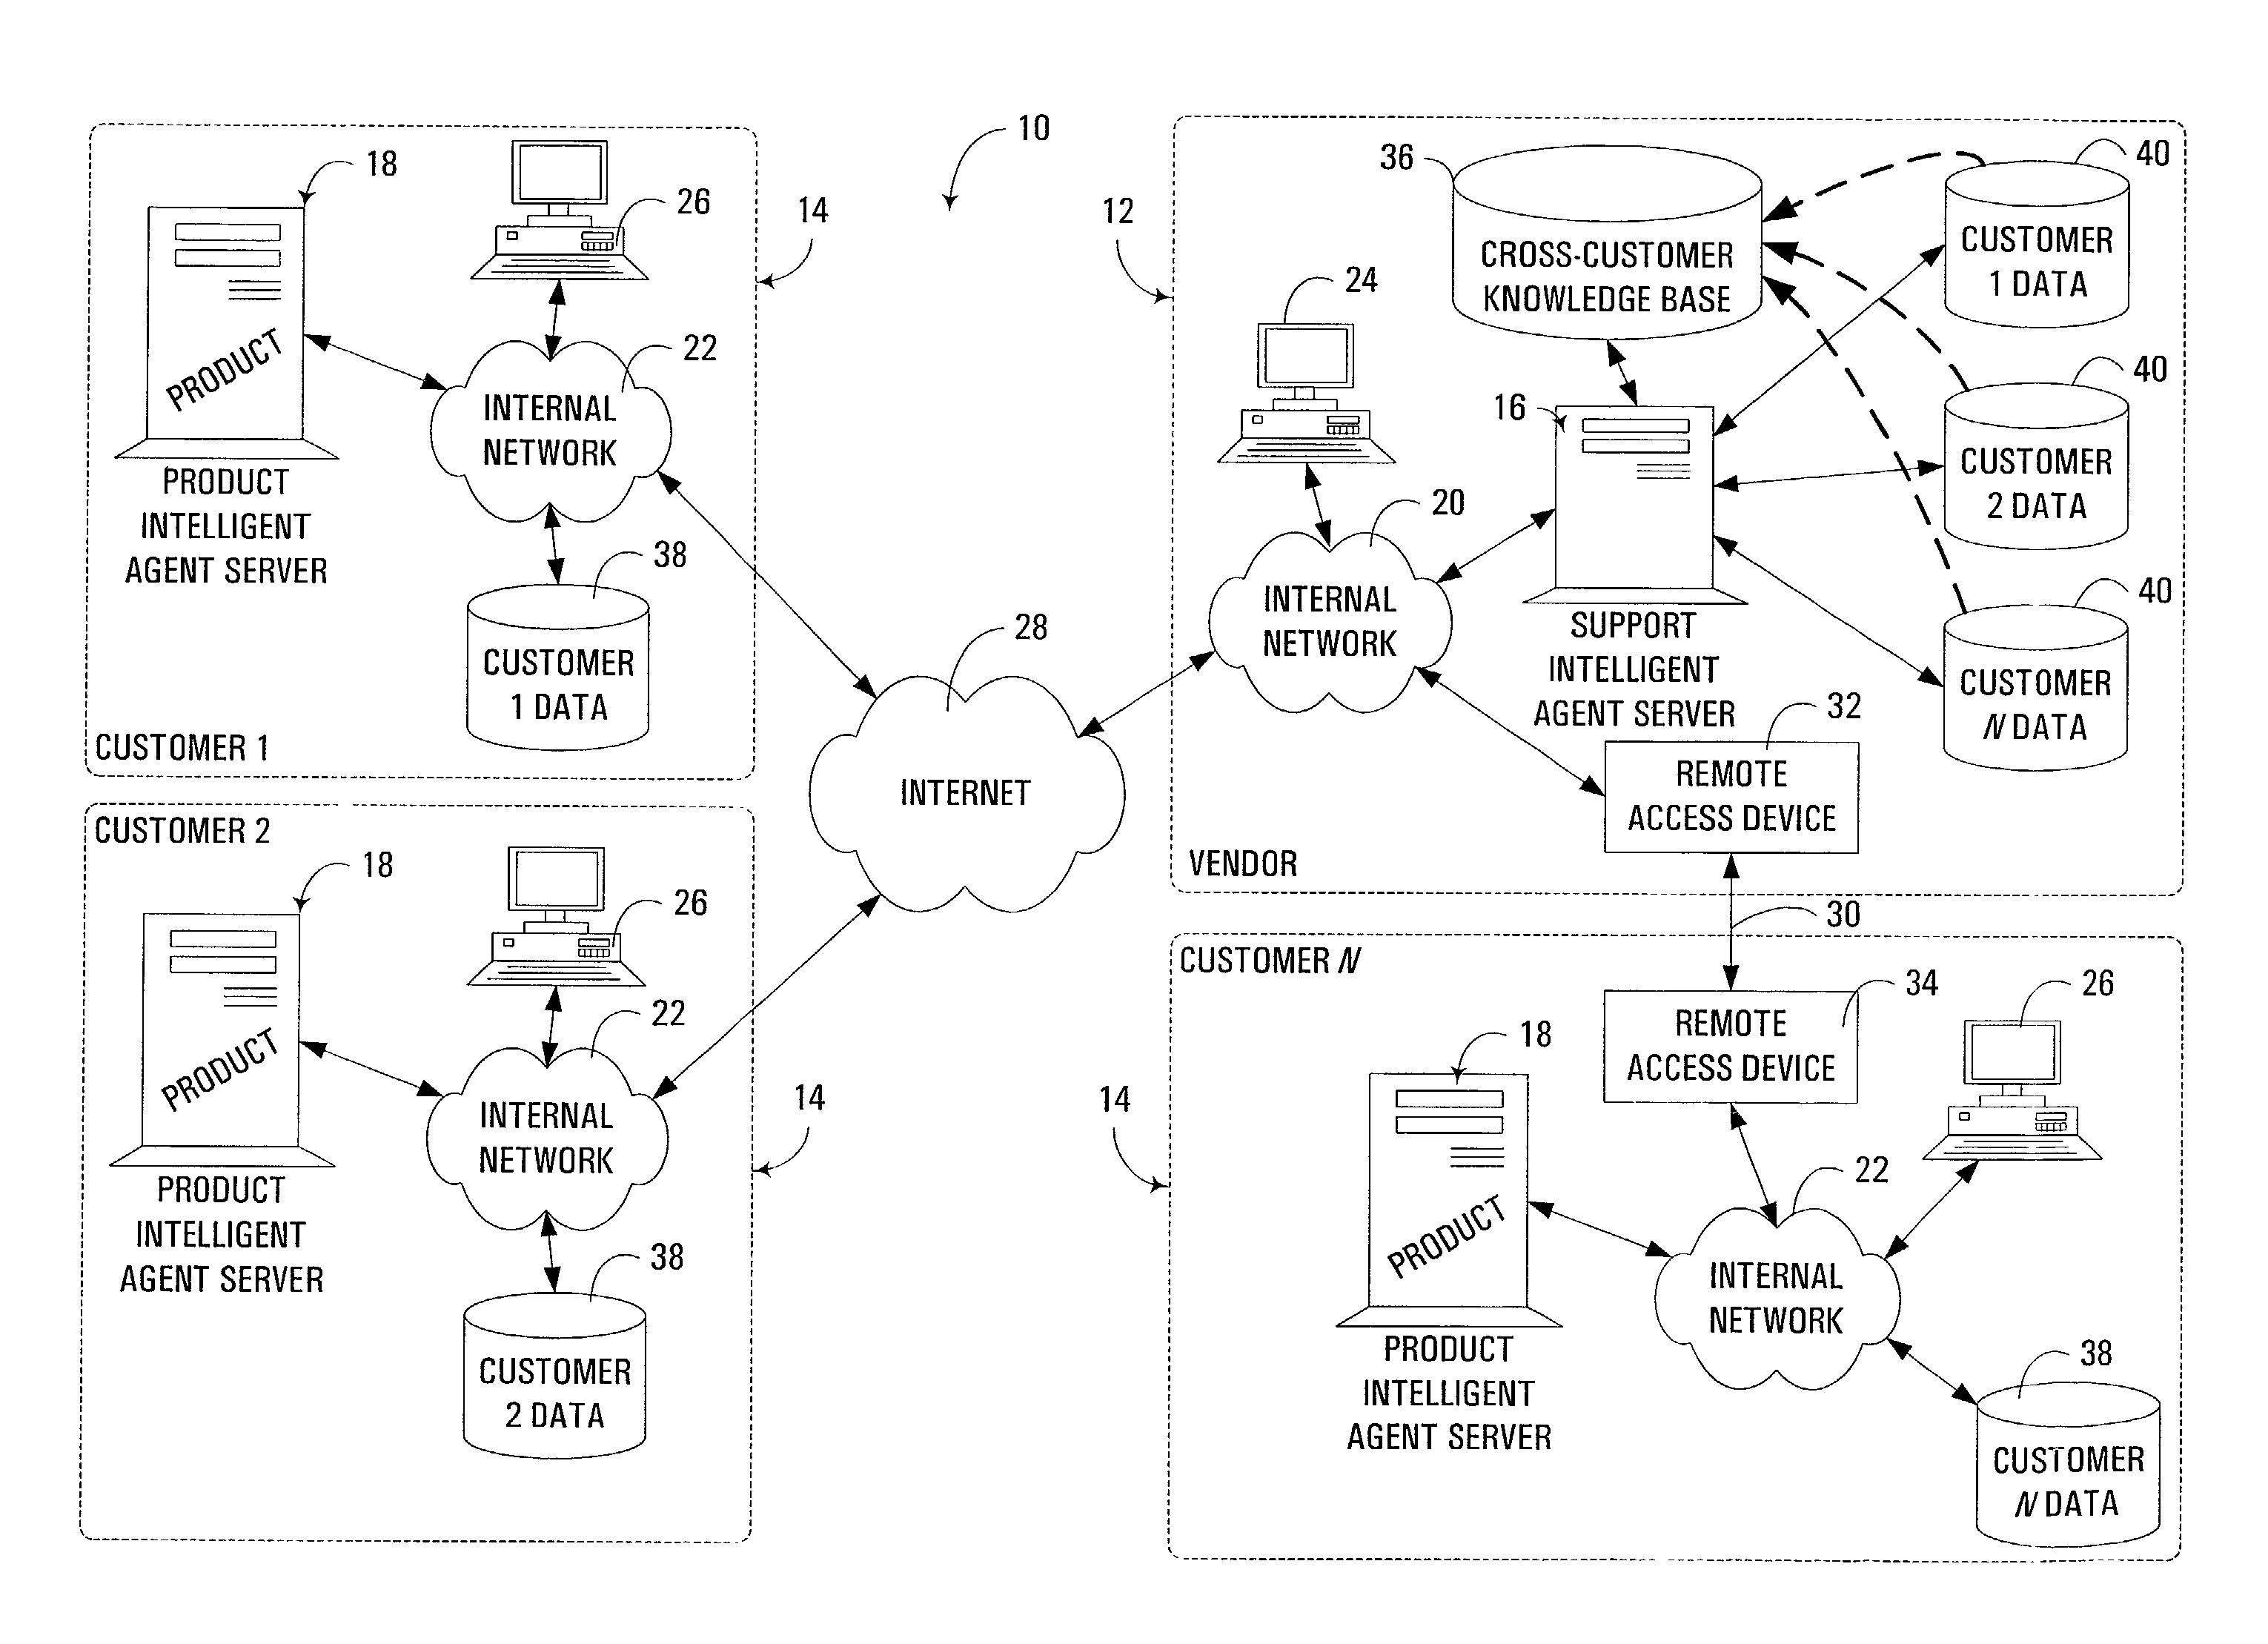 Product support of computer-related products using intelligent agents